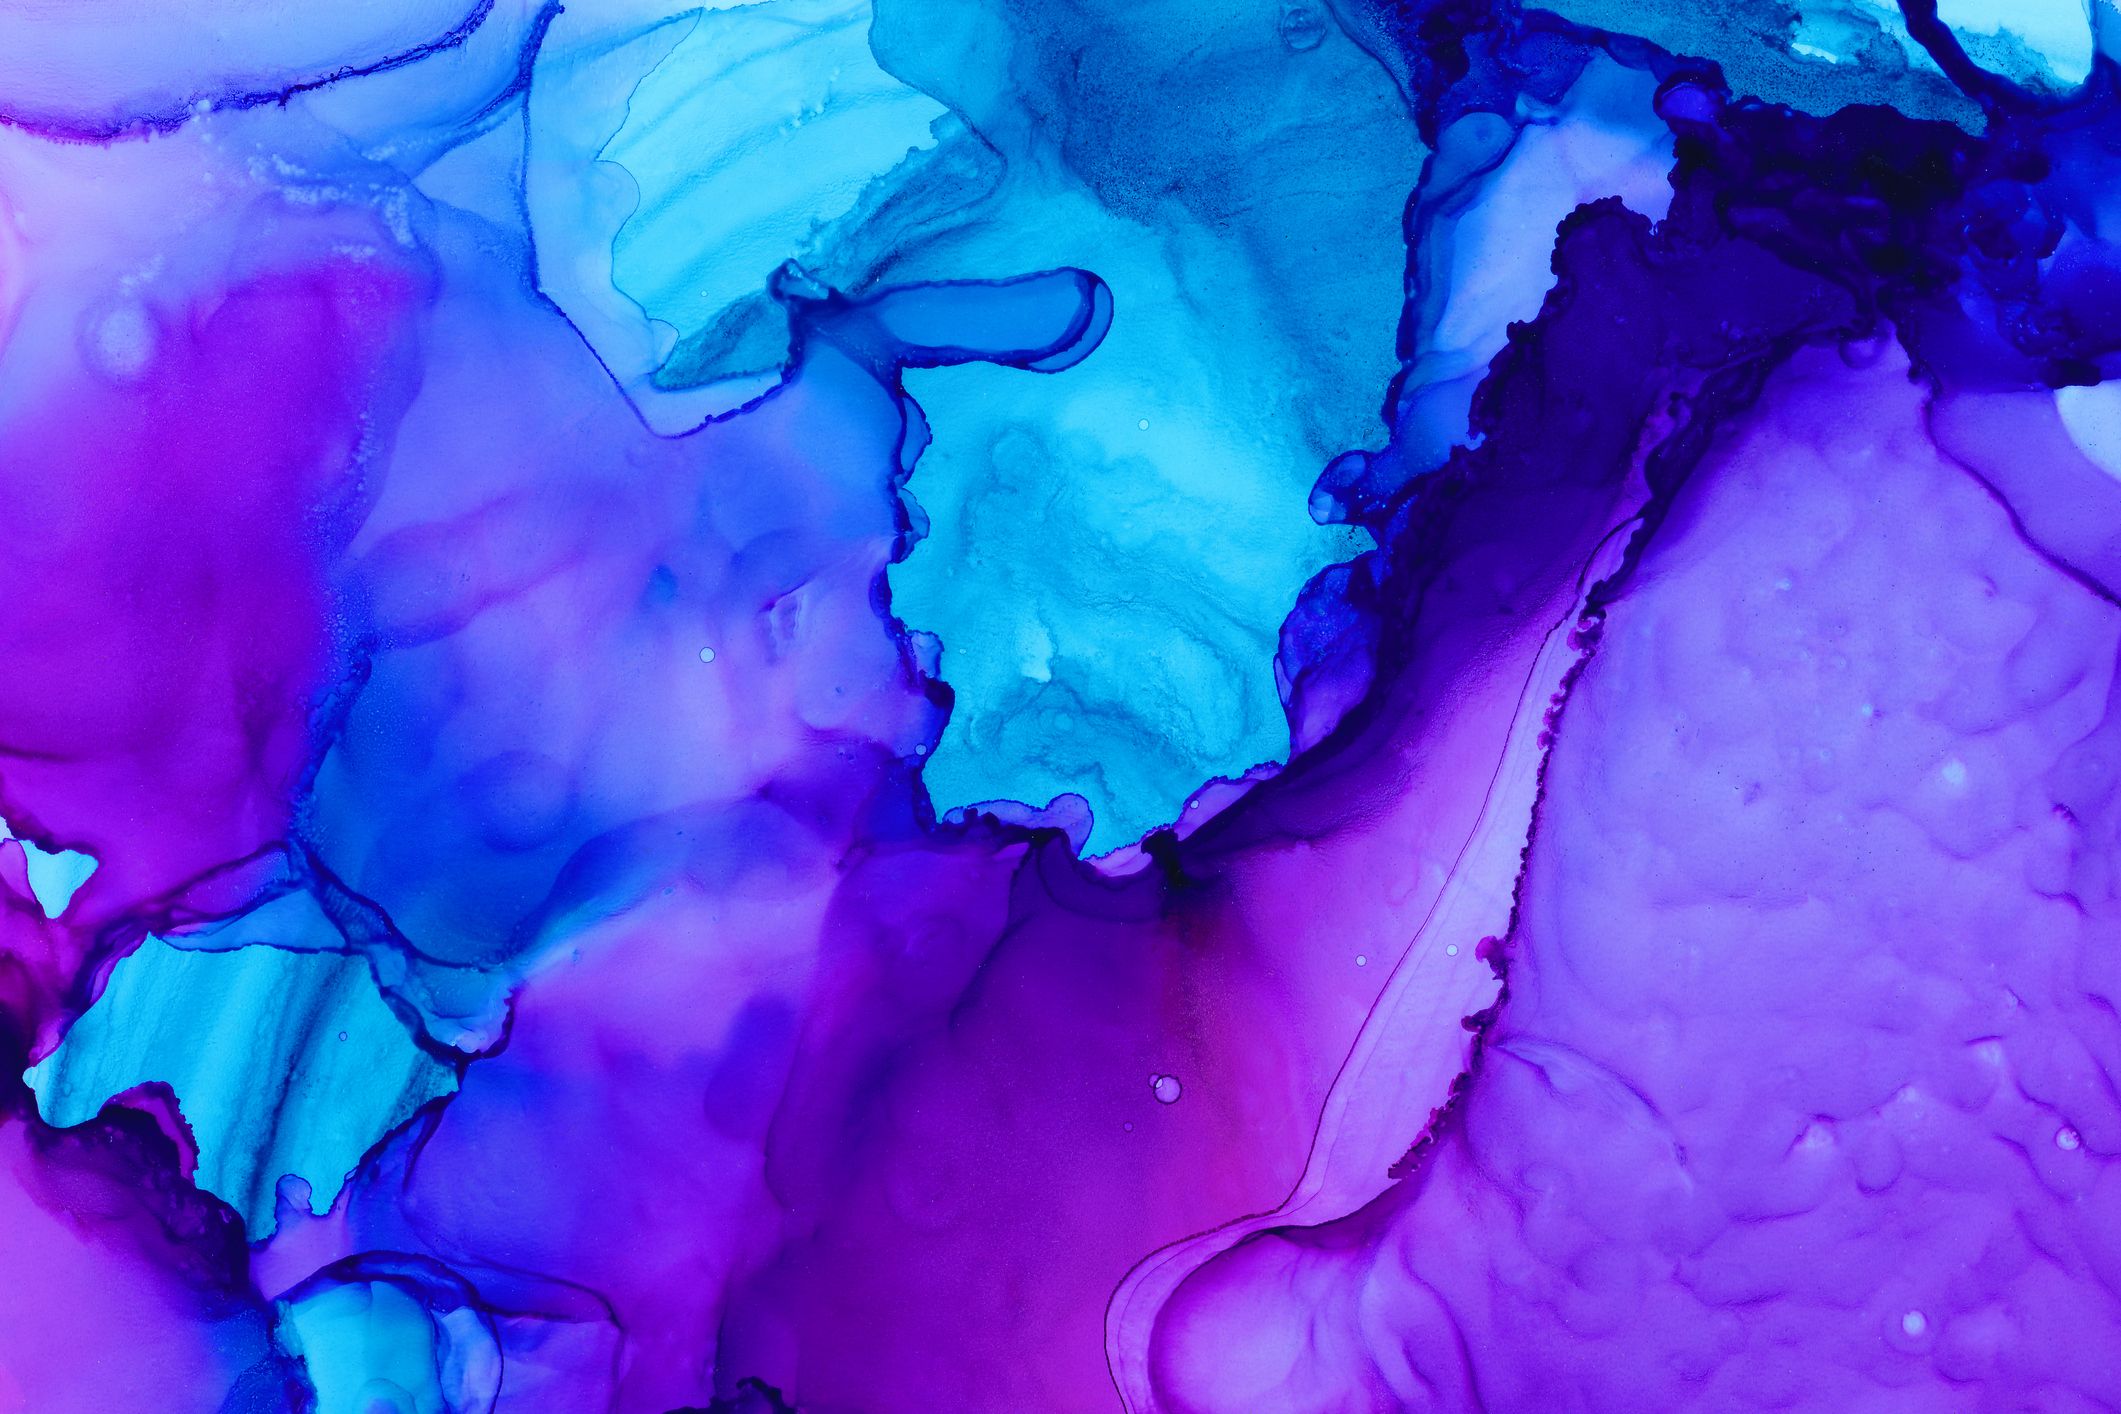 Blue and purple abstract art.